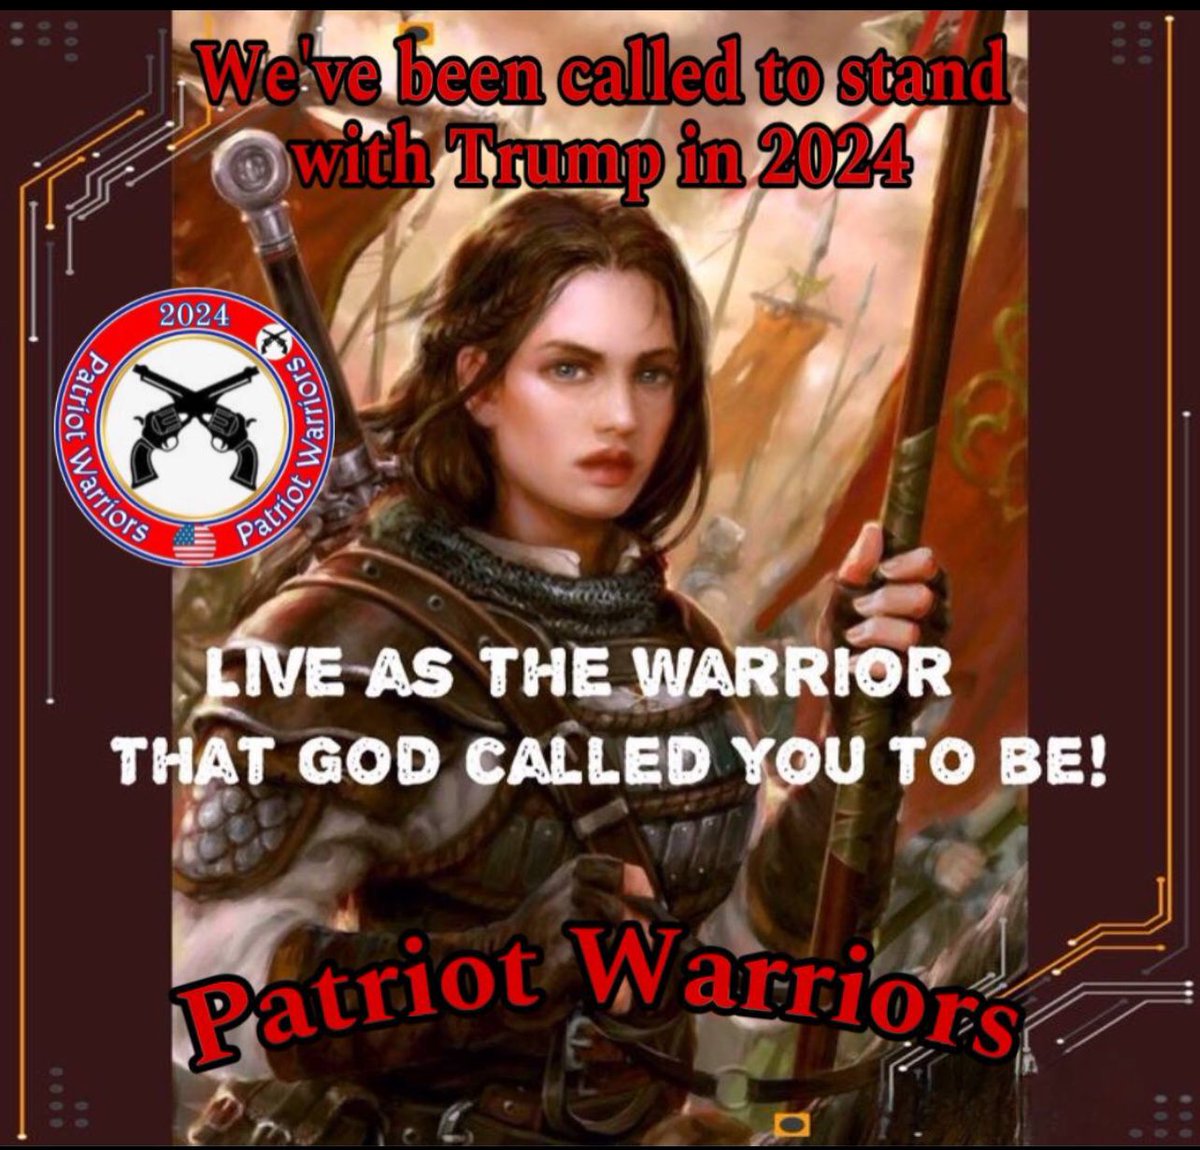 🚨 BOOMER 🚂 228 🚨 🇺🇸🇺🇸 We stand with TRUMP for fighting for our Religious Freedom and Standing for Life. 🇺🇸🇺🇸 @Yorkshirecath @MagaPatriotHM @Jothedeplorable @RAGINxCAJUN @Gentleman2741 @ZollmanBBecker @PURE_BL00D2 @Ilegvm @bdonesem @Sir_Charlsss @sallykycheer…